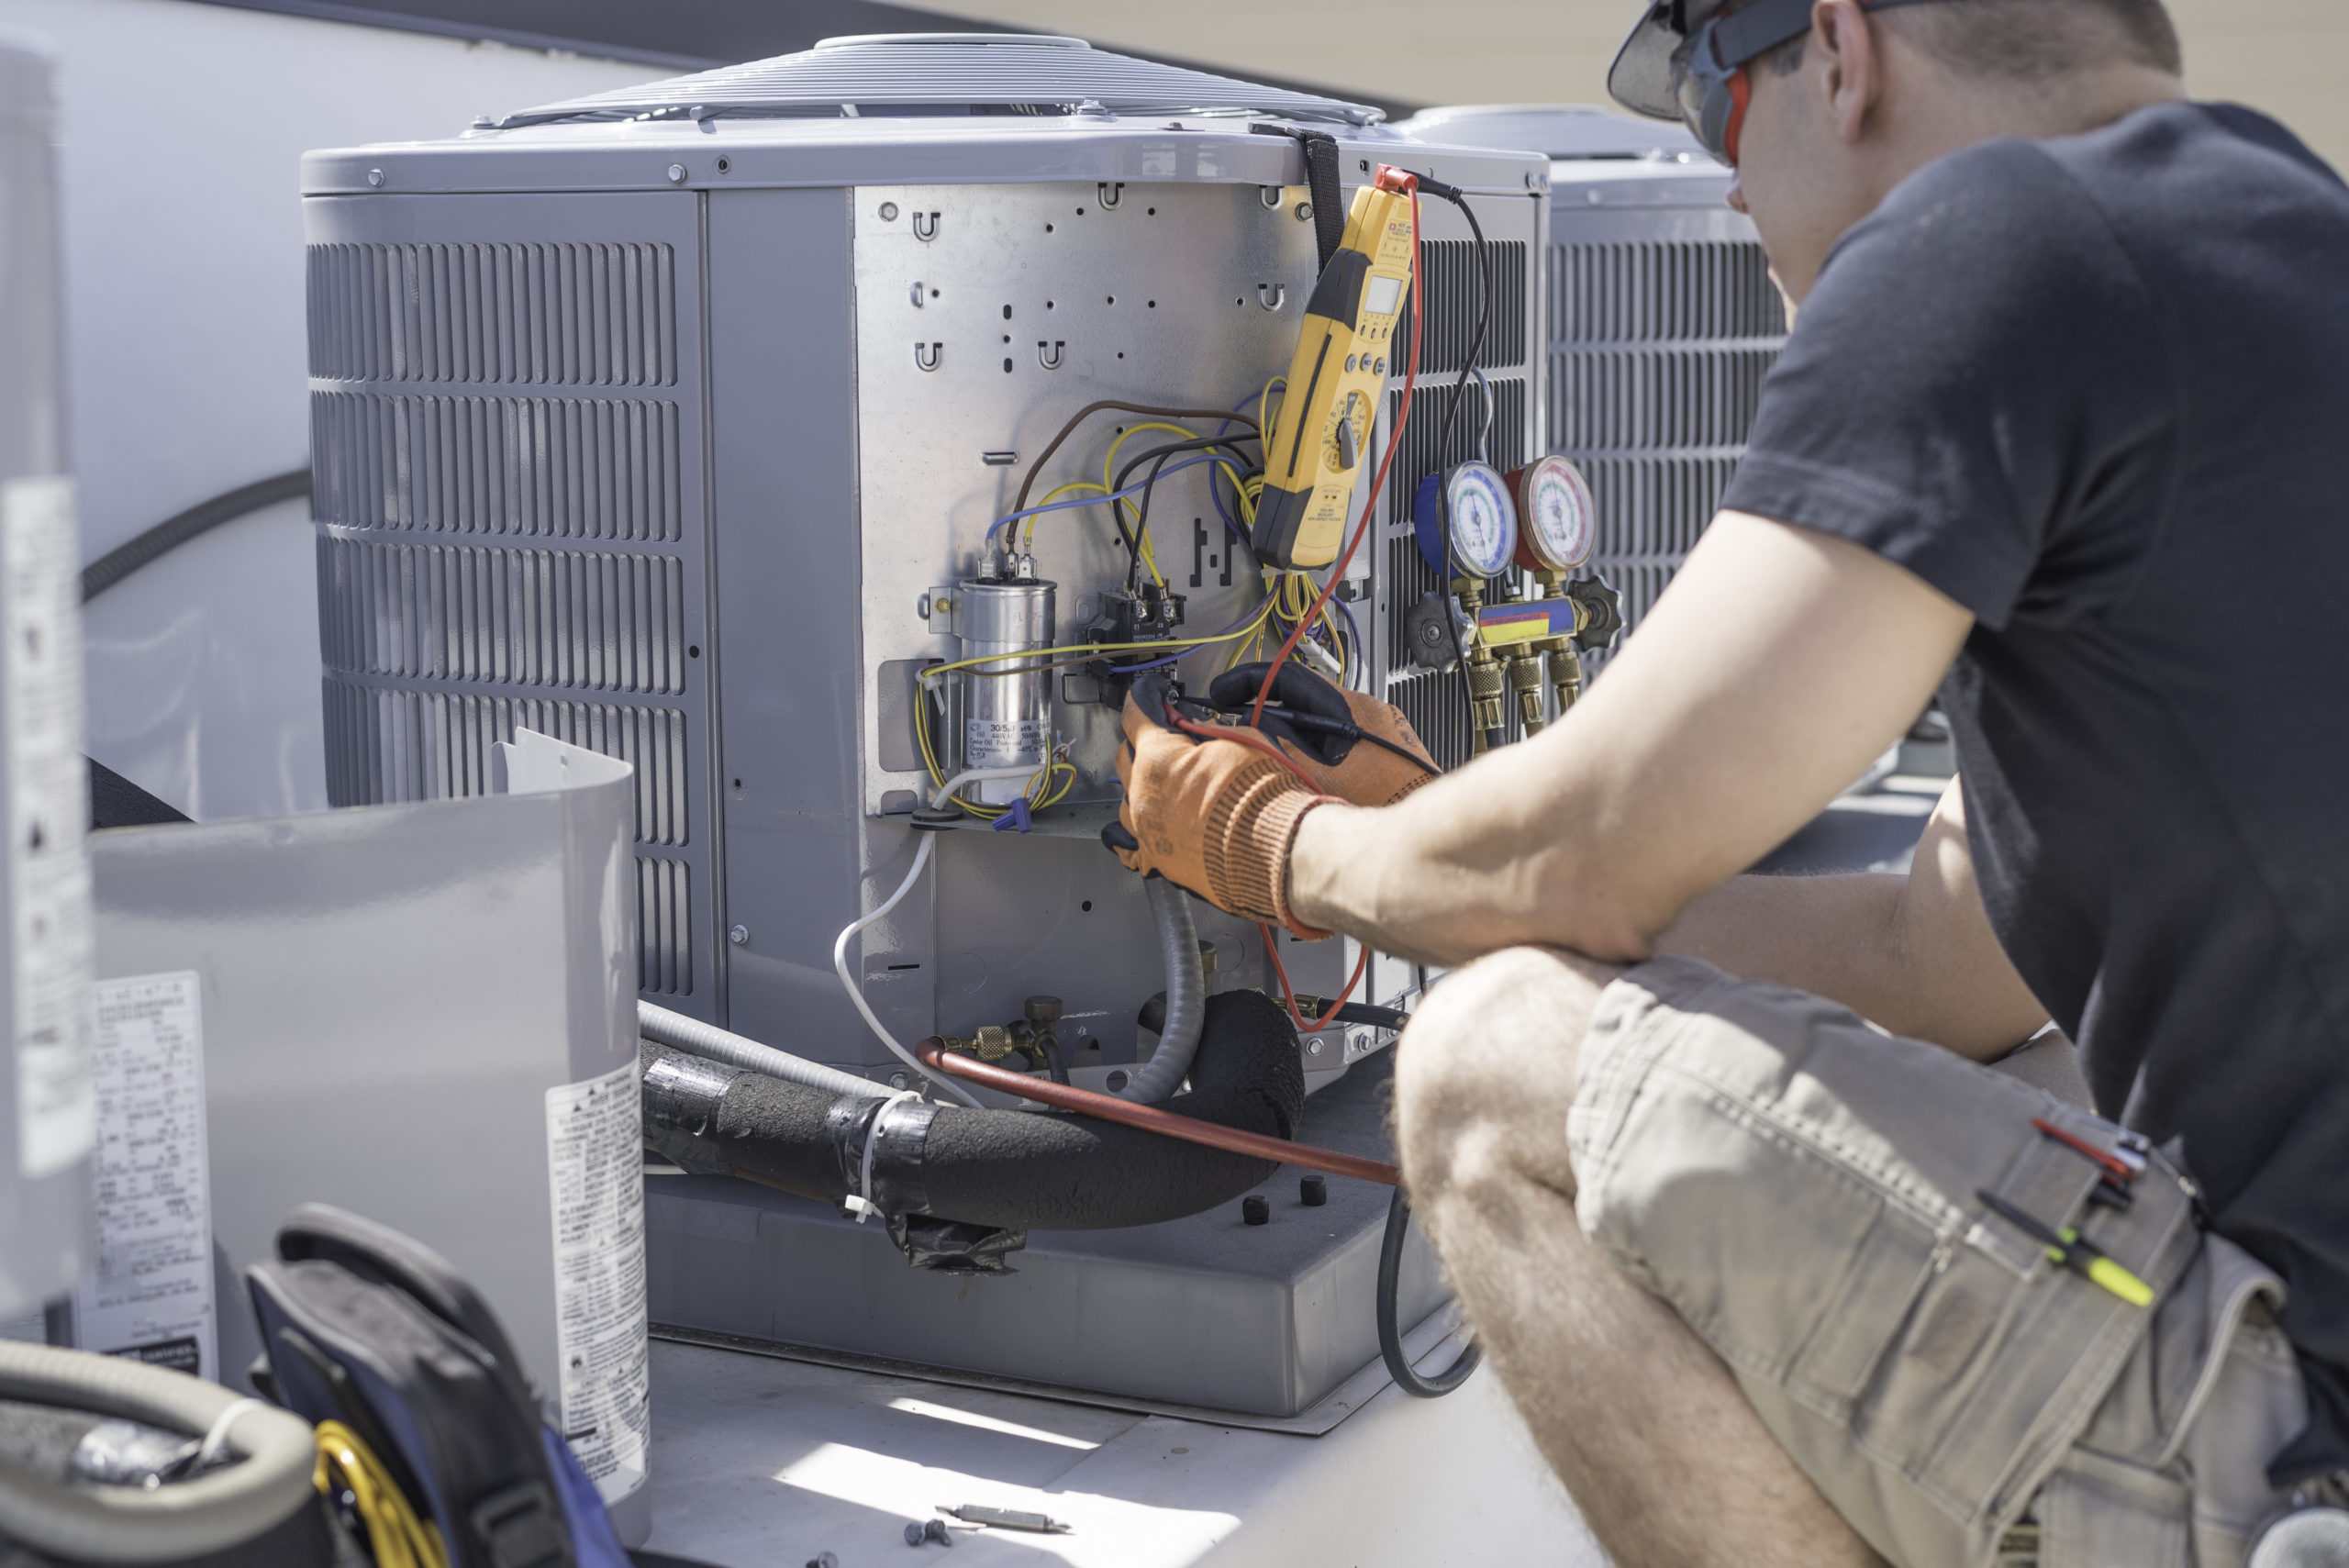 Proper Steps for Turning Your AC Unit On After Winter